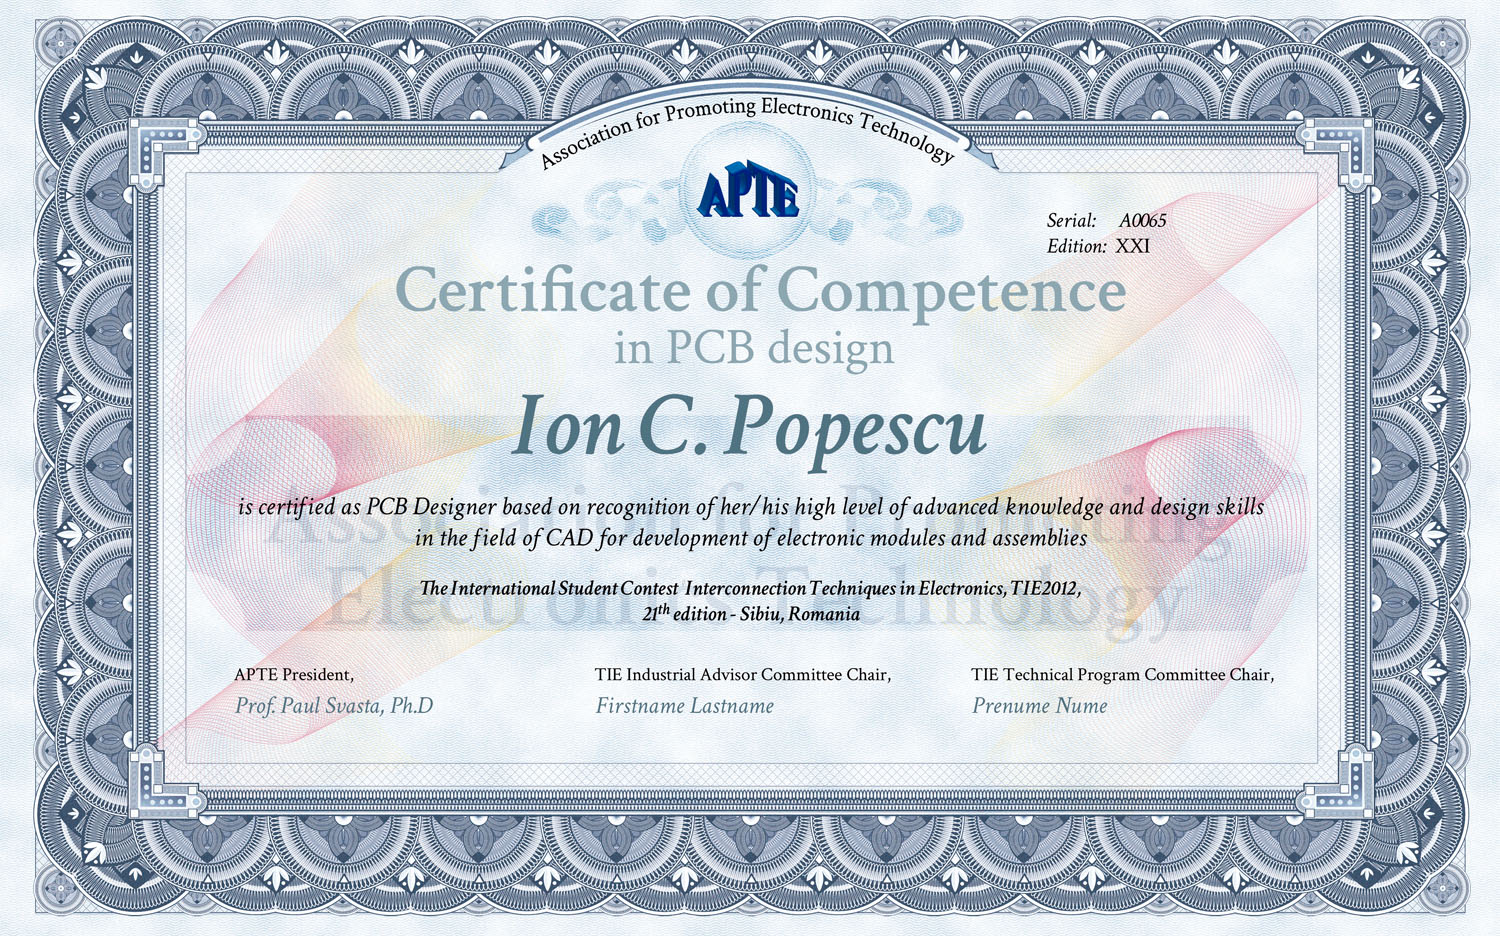 Model of Certificate of Competence in PCB design